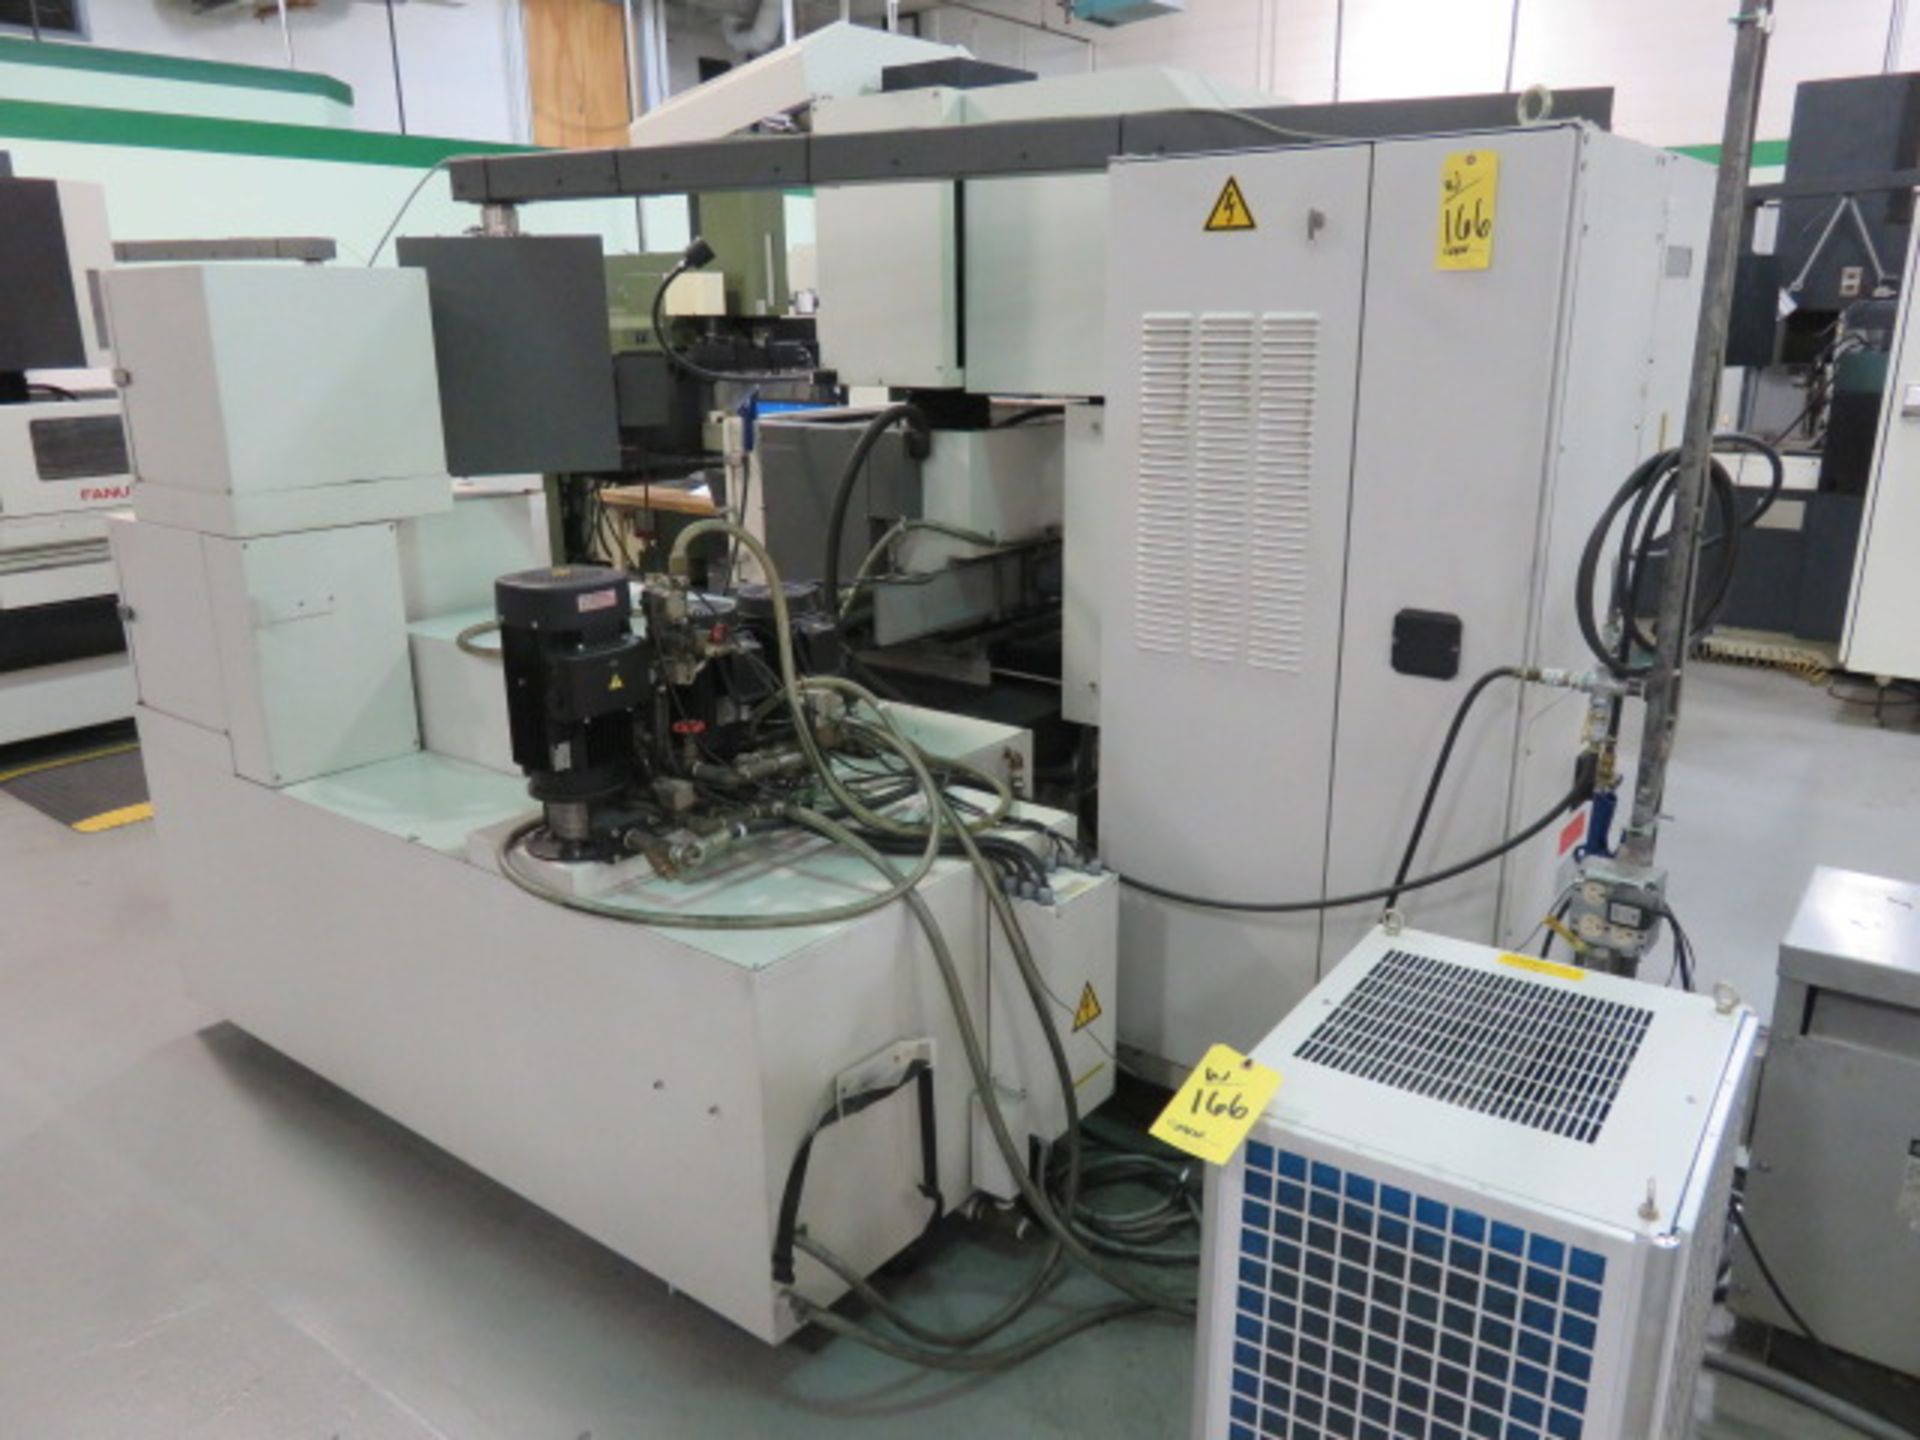 Fanuc 4-Axis CNC Wire EDM Machine Model Robocut AX-1iC, S/N P051C1571 (2005), 43 in. x 33 in. x 21 i - Image 4 of 6